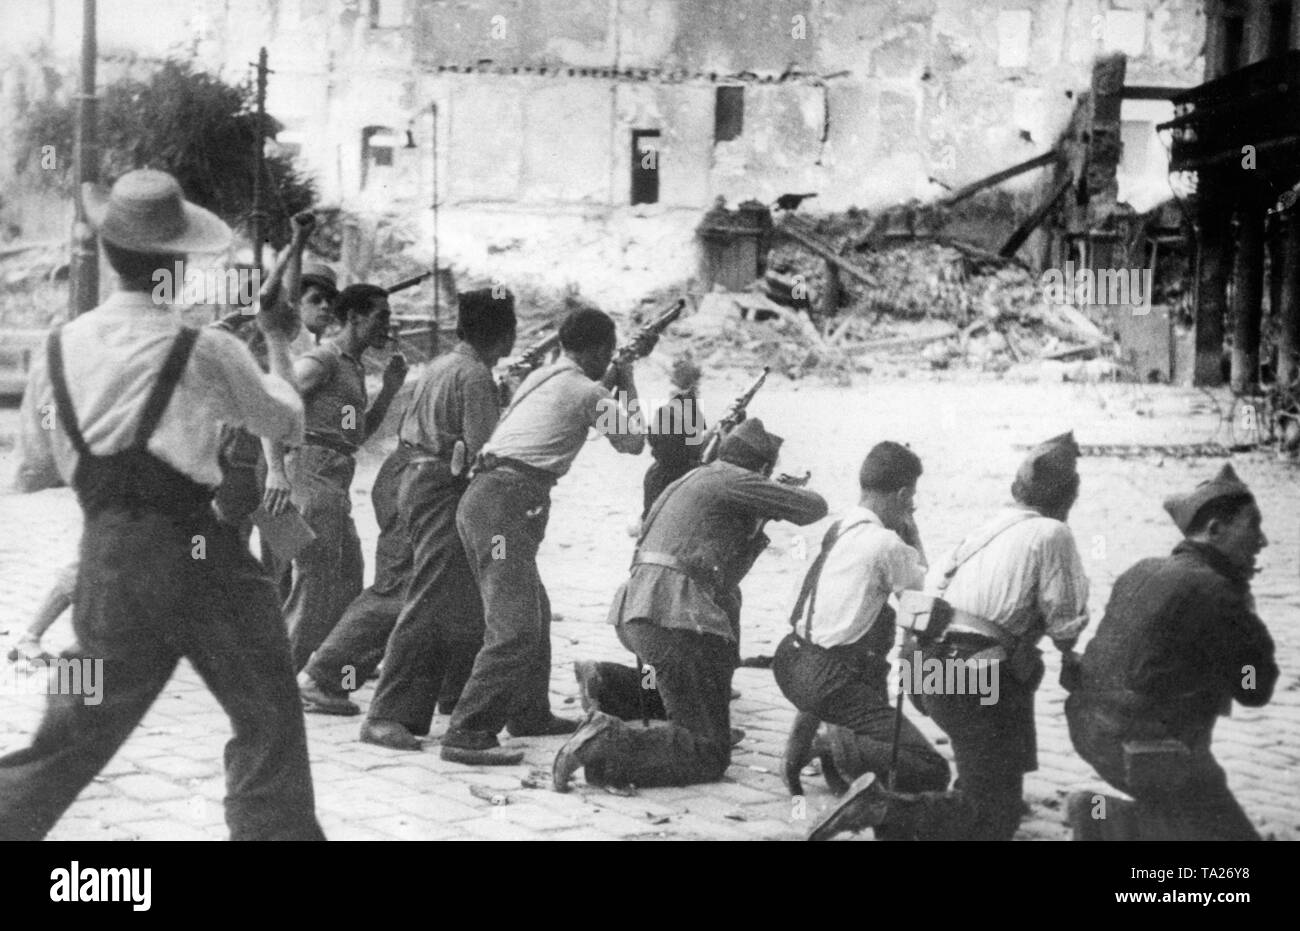 Photo of a group of Republican fighters during the siege of the Alcazar of Toledo in the summer of 1936. The armed soldiers wear civilian clothes or uniforms. Stock Photo